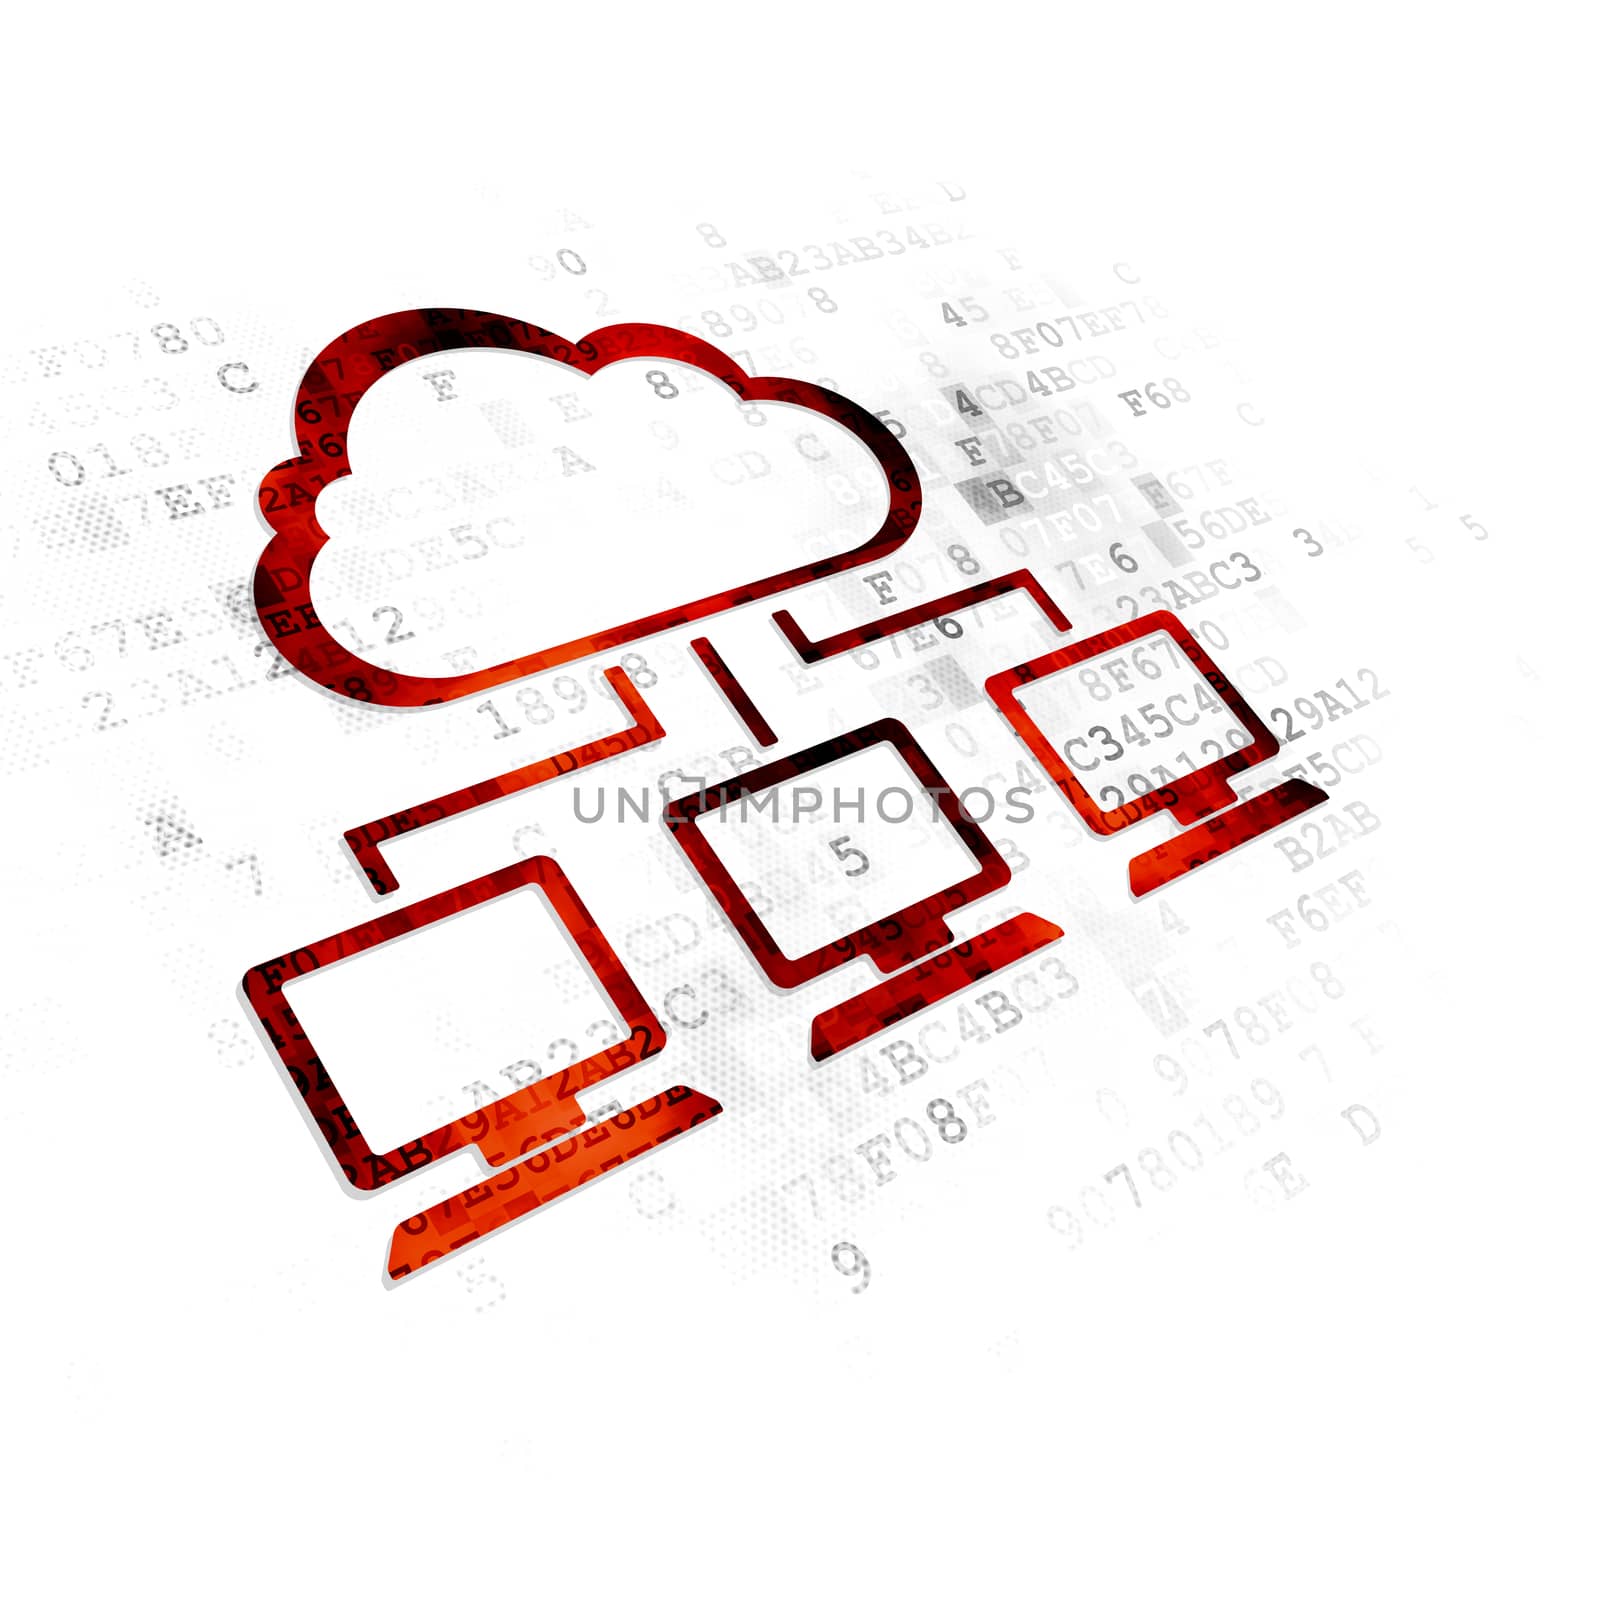 Cloud computing concept: Pixelated red Cloud Network icon on Digital background